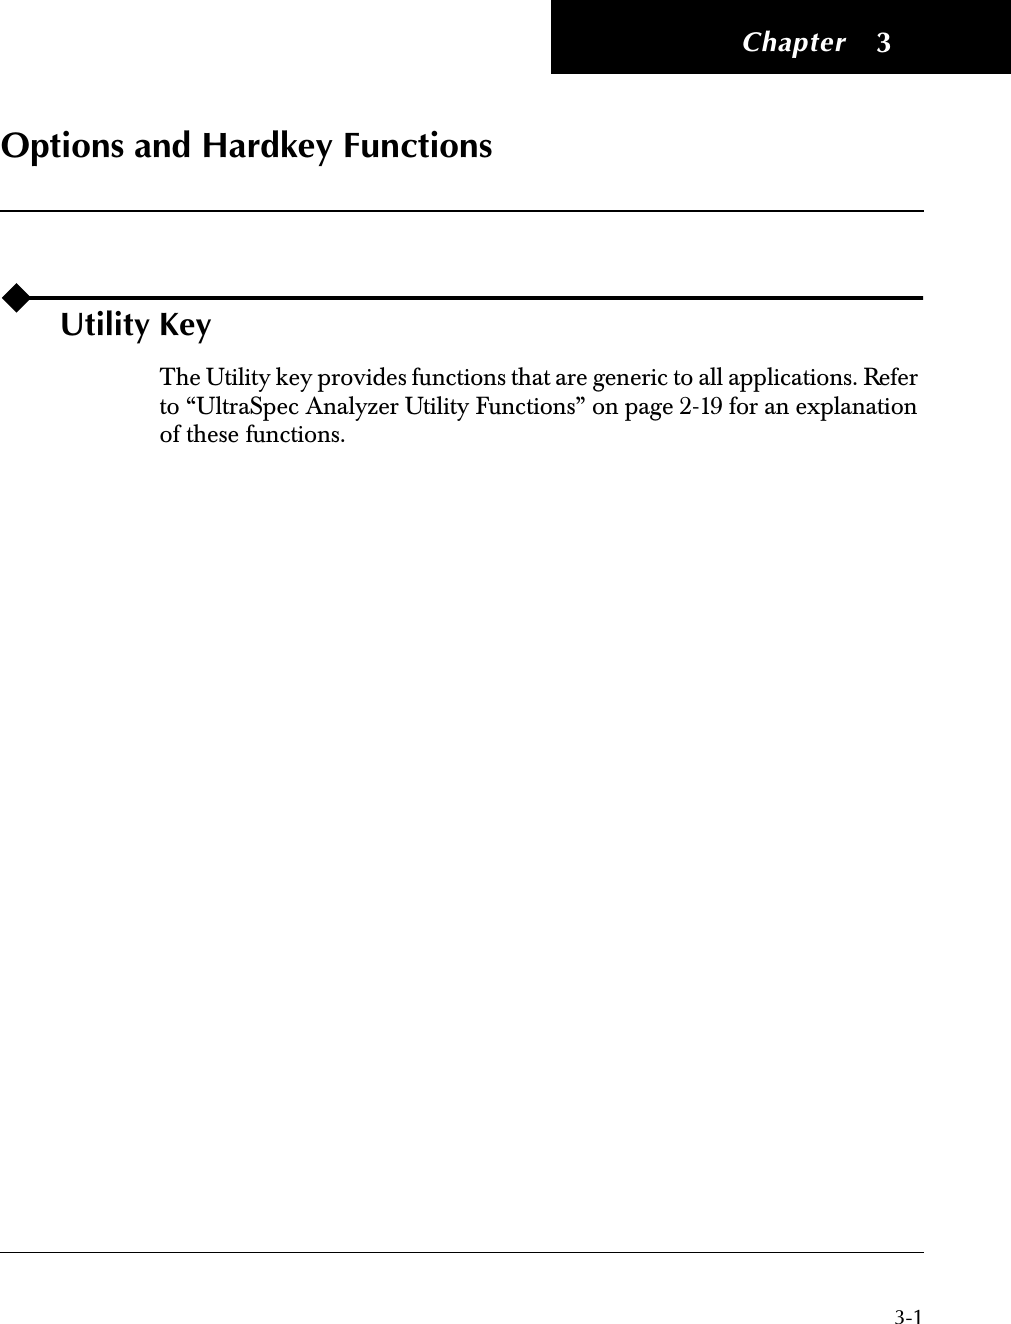  Chapter 3-1 3 Options and Hardkey Functions Utility Key The Utility key provides functions that are generic to all applications. Refer to “UltraSpec Analyzer Utility Functions” on page 2-19 for an explanation of these functions.